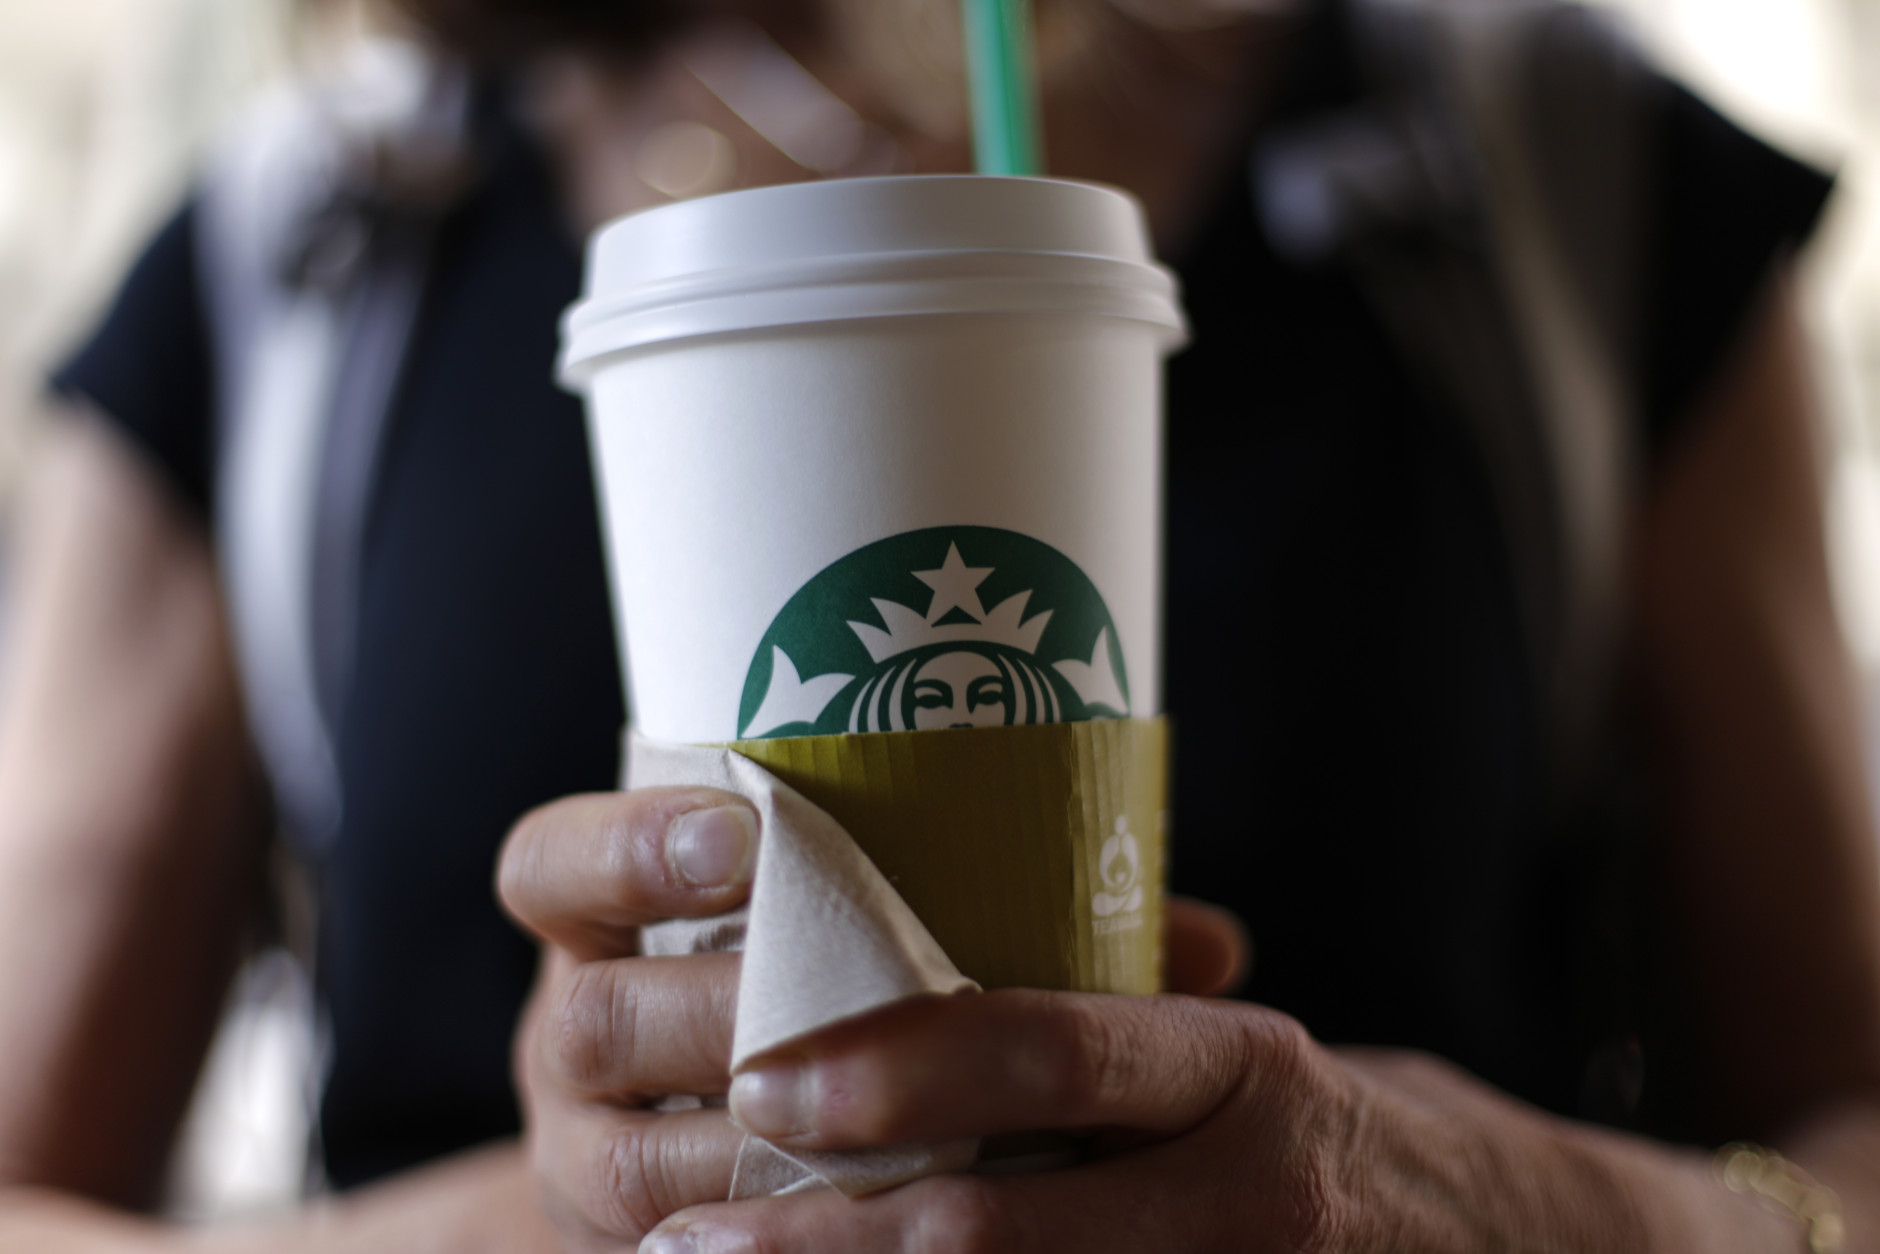 In this May 31, 2014 photo, a woman holds a coffee drink outside a Starbucks in downtown Chicago. Starbucks is raising prices on some of its drinks by 5 cents to 20 cents starting next week, and customers can also soon expect to pay $1 more for the packaged coffee it sells in supermarkets. Prices for medium and large brewed coffees, which are known as Grande and Venti, respectively, will go up between 10 cents and 15 cents in most U.S. markets, the company said.  (AP Photo/Gene J. Puskar)